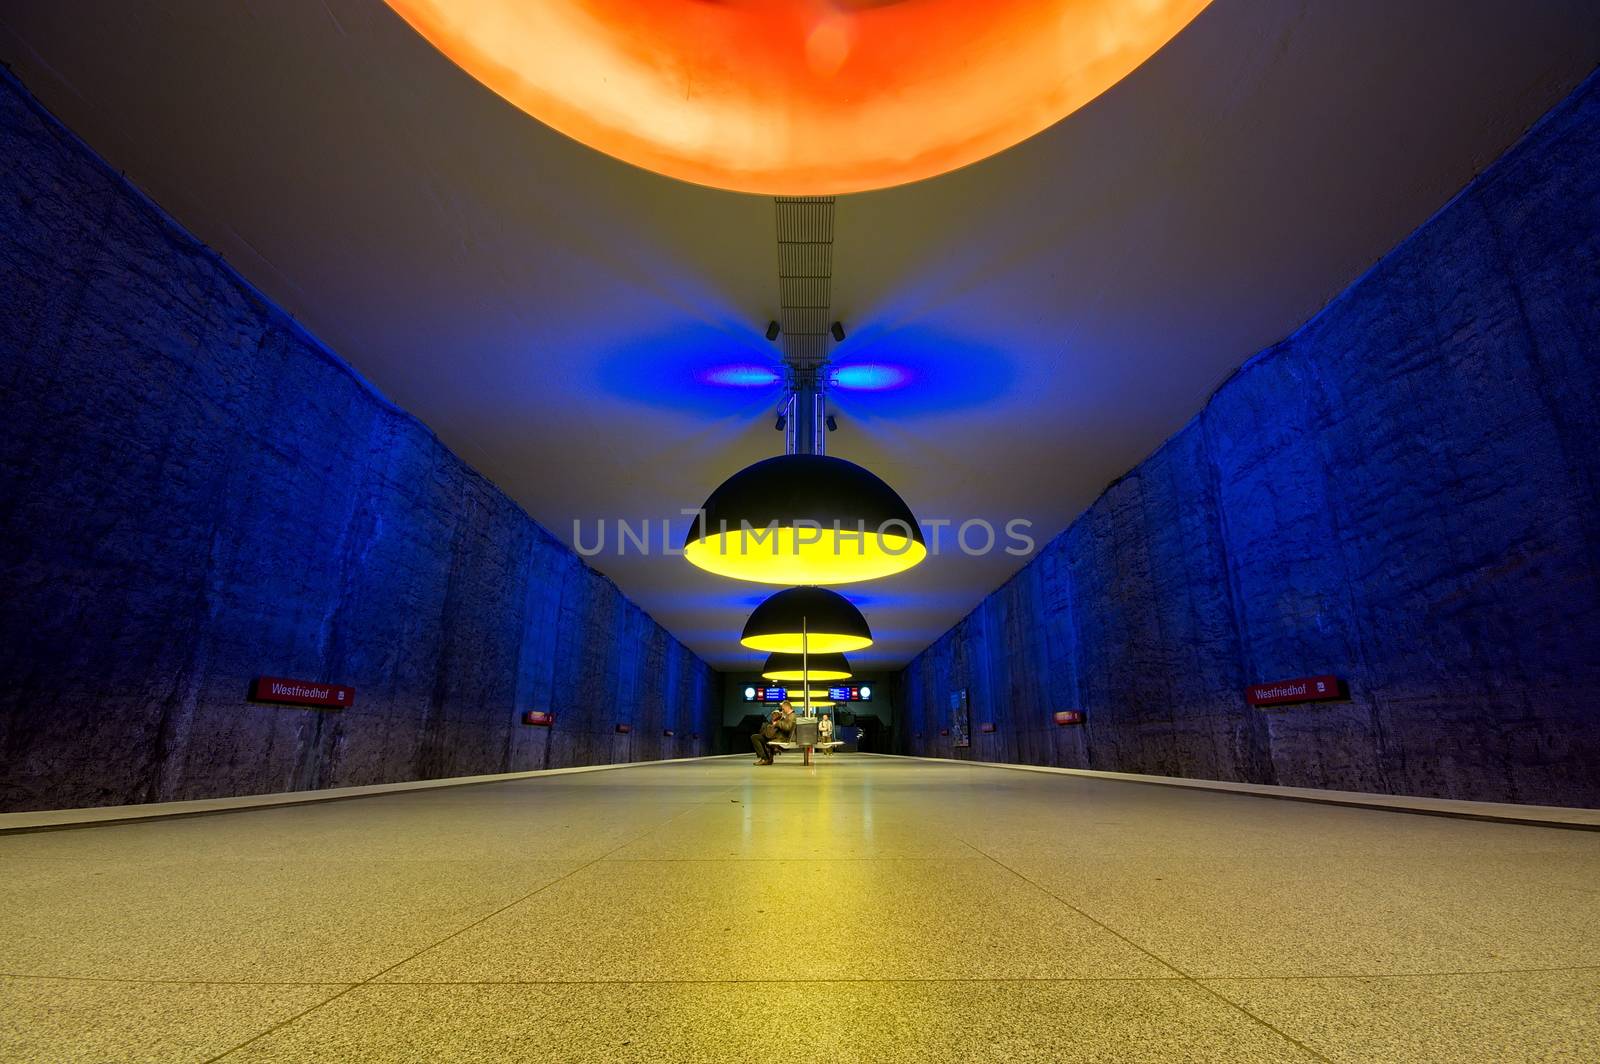 Westfriedhof subway station in Munich, Germany by anderm